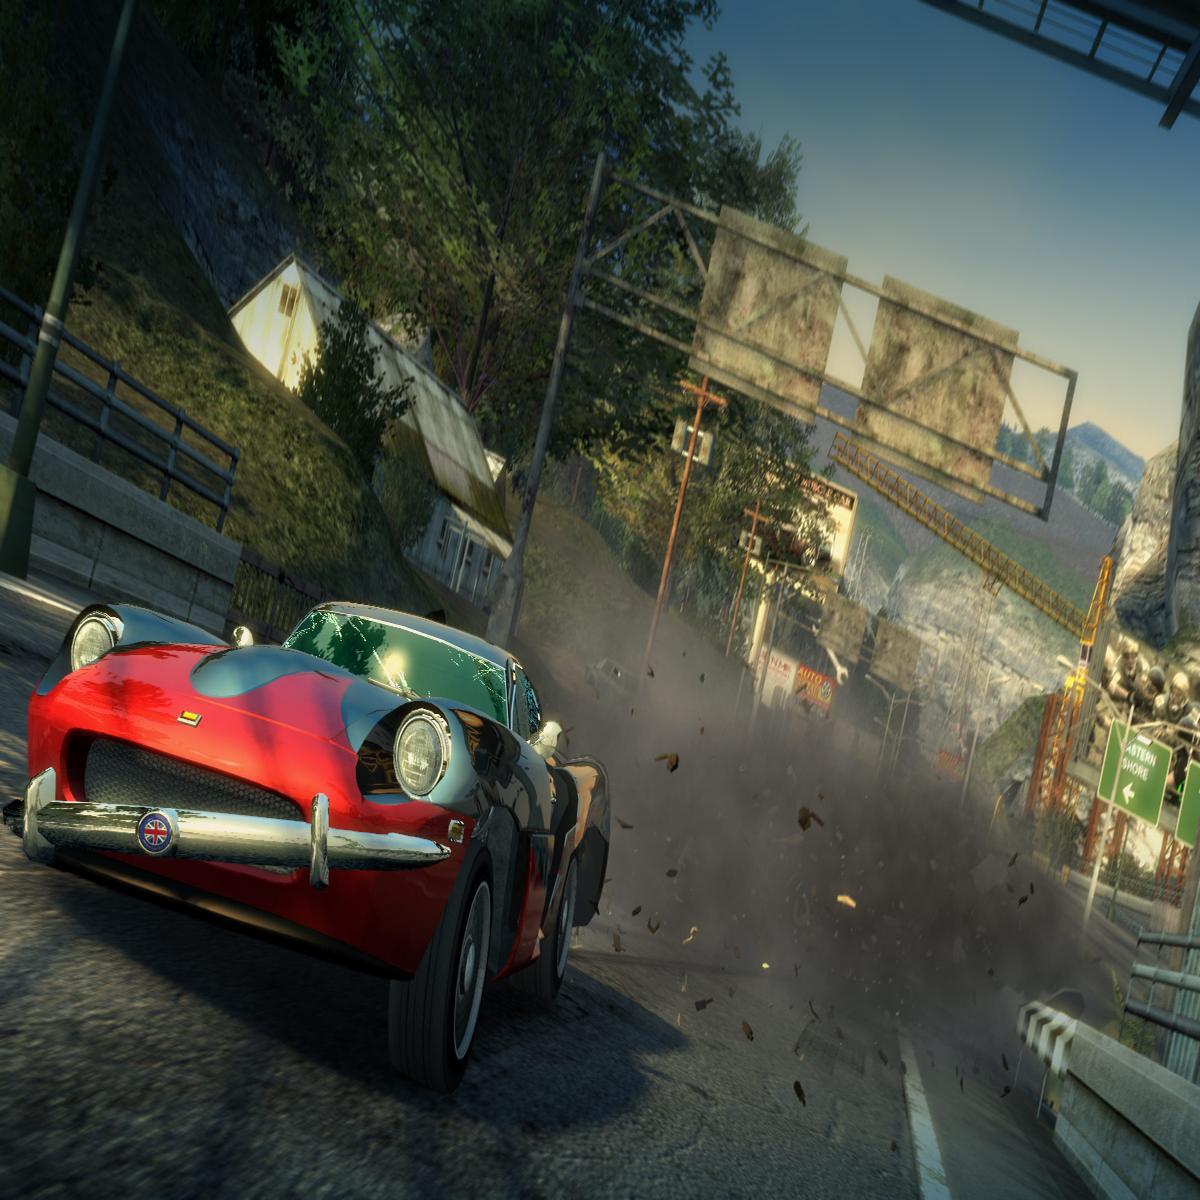 Review: Burnout Paradise Remastered (Nintendo Switch) - Pure Nintendo